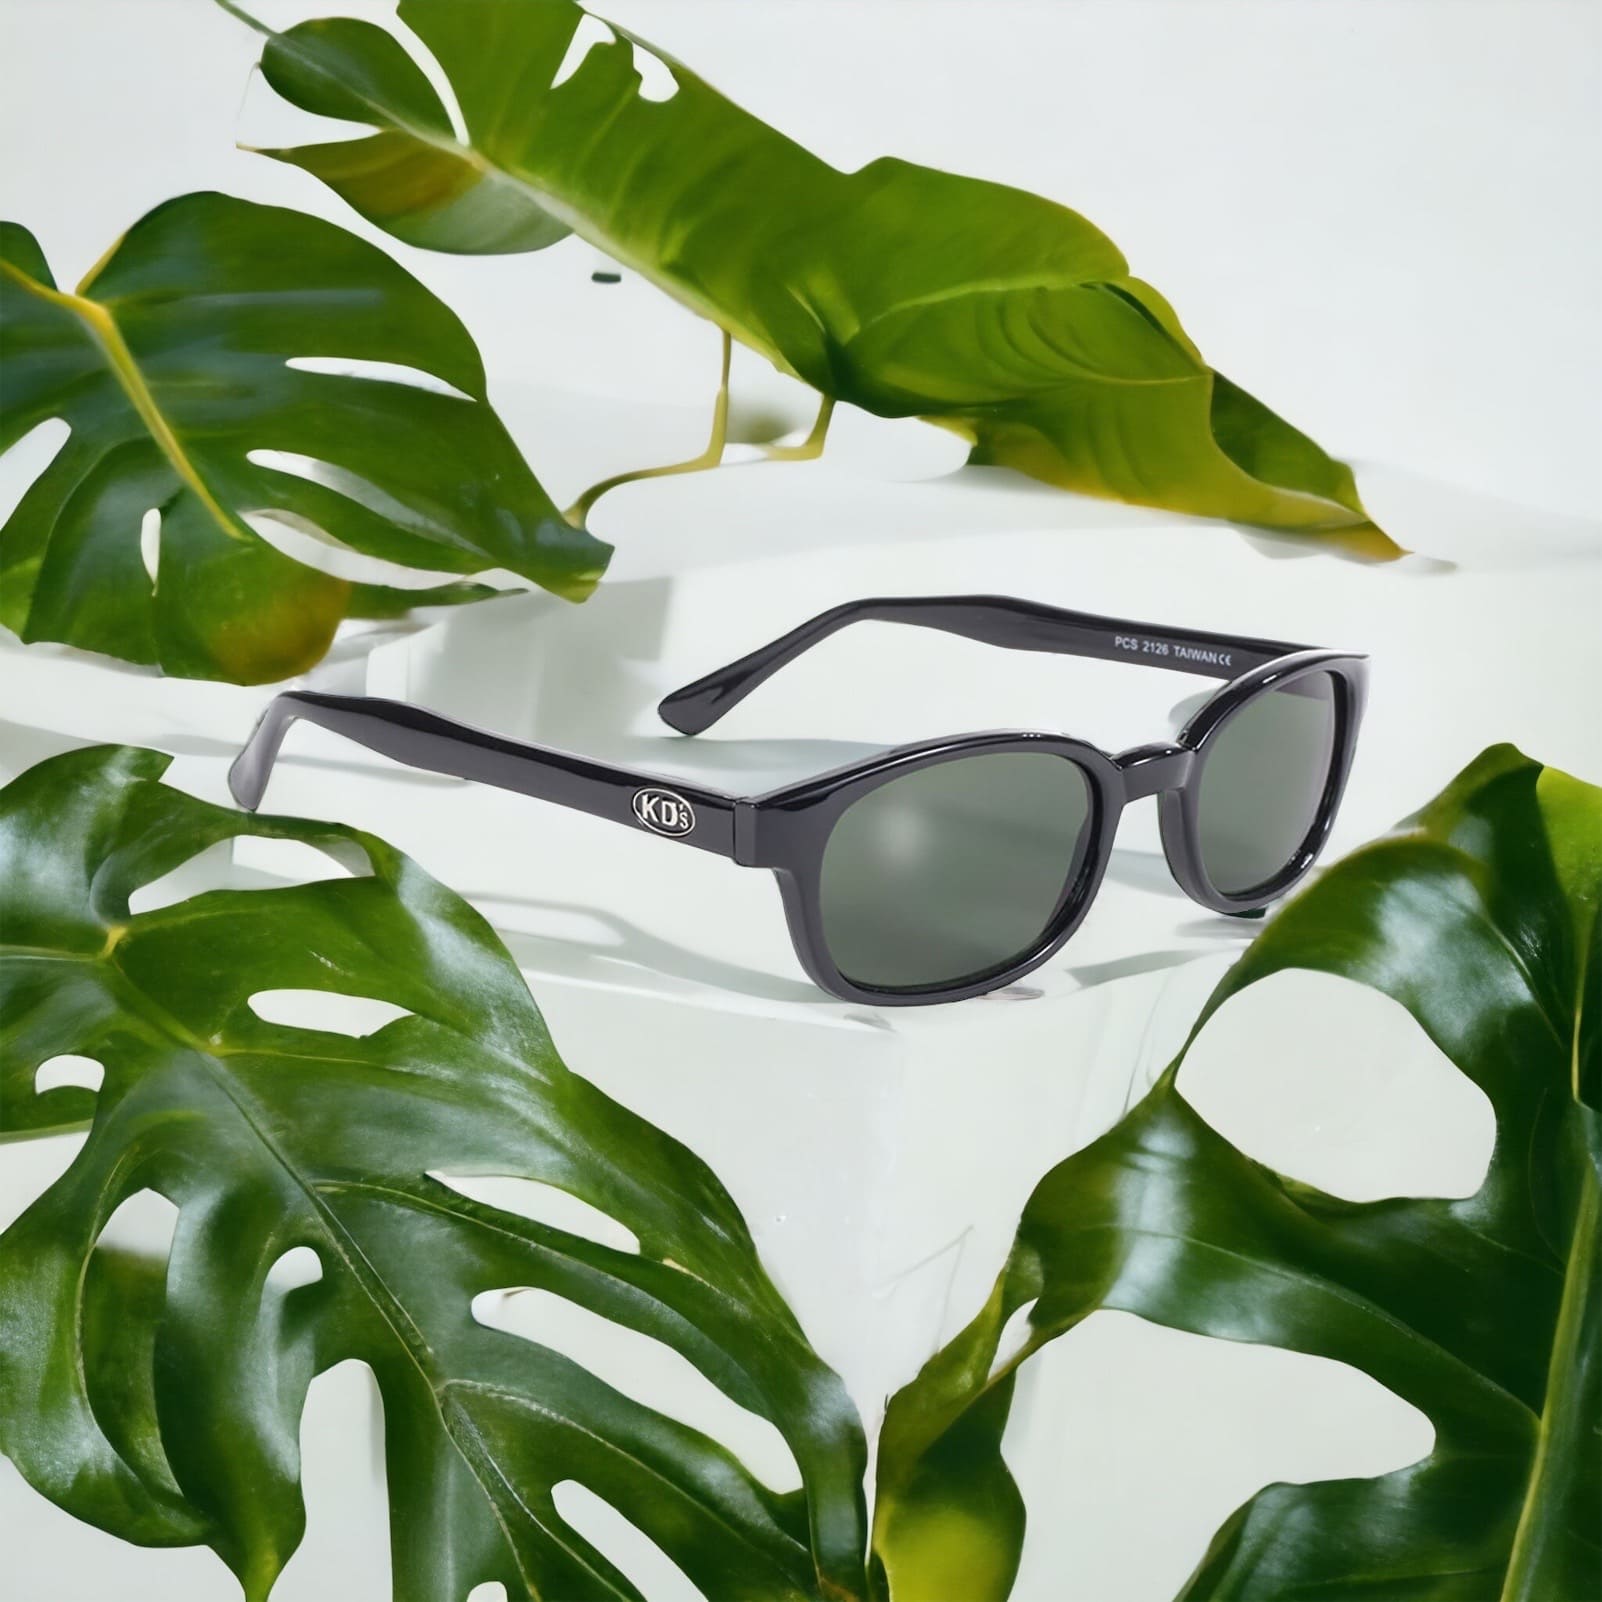 The stylish KD's 2126 sunglasses with dark green polycarbonate lenses and a solid black frame placed on a white furniture surrounded by plants.